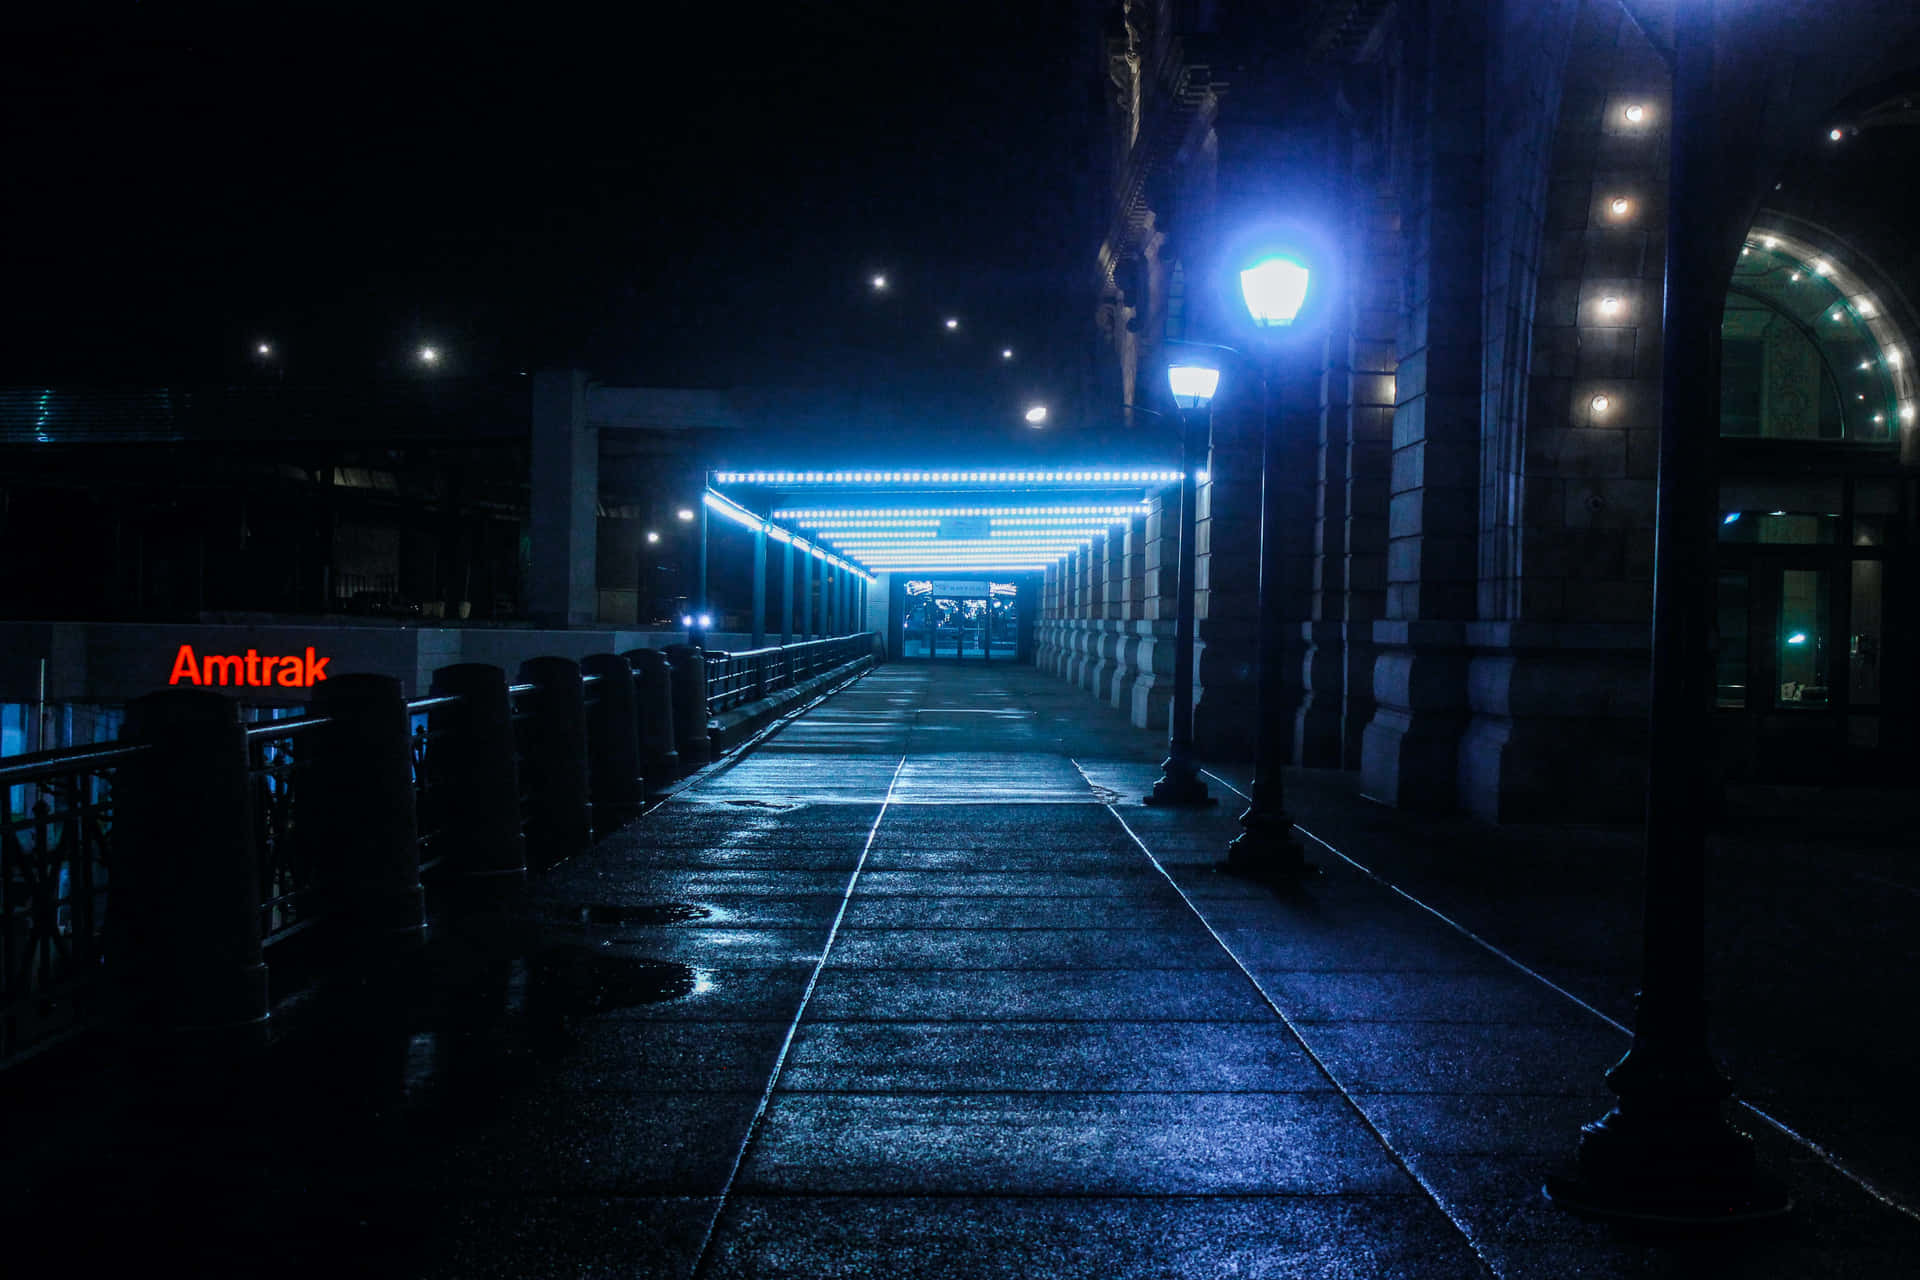 Explore the city streets at night